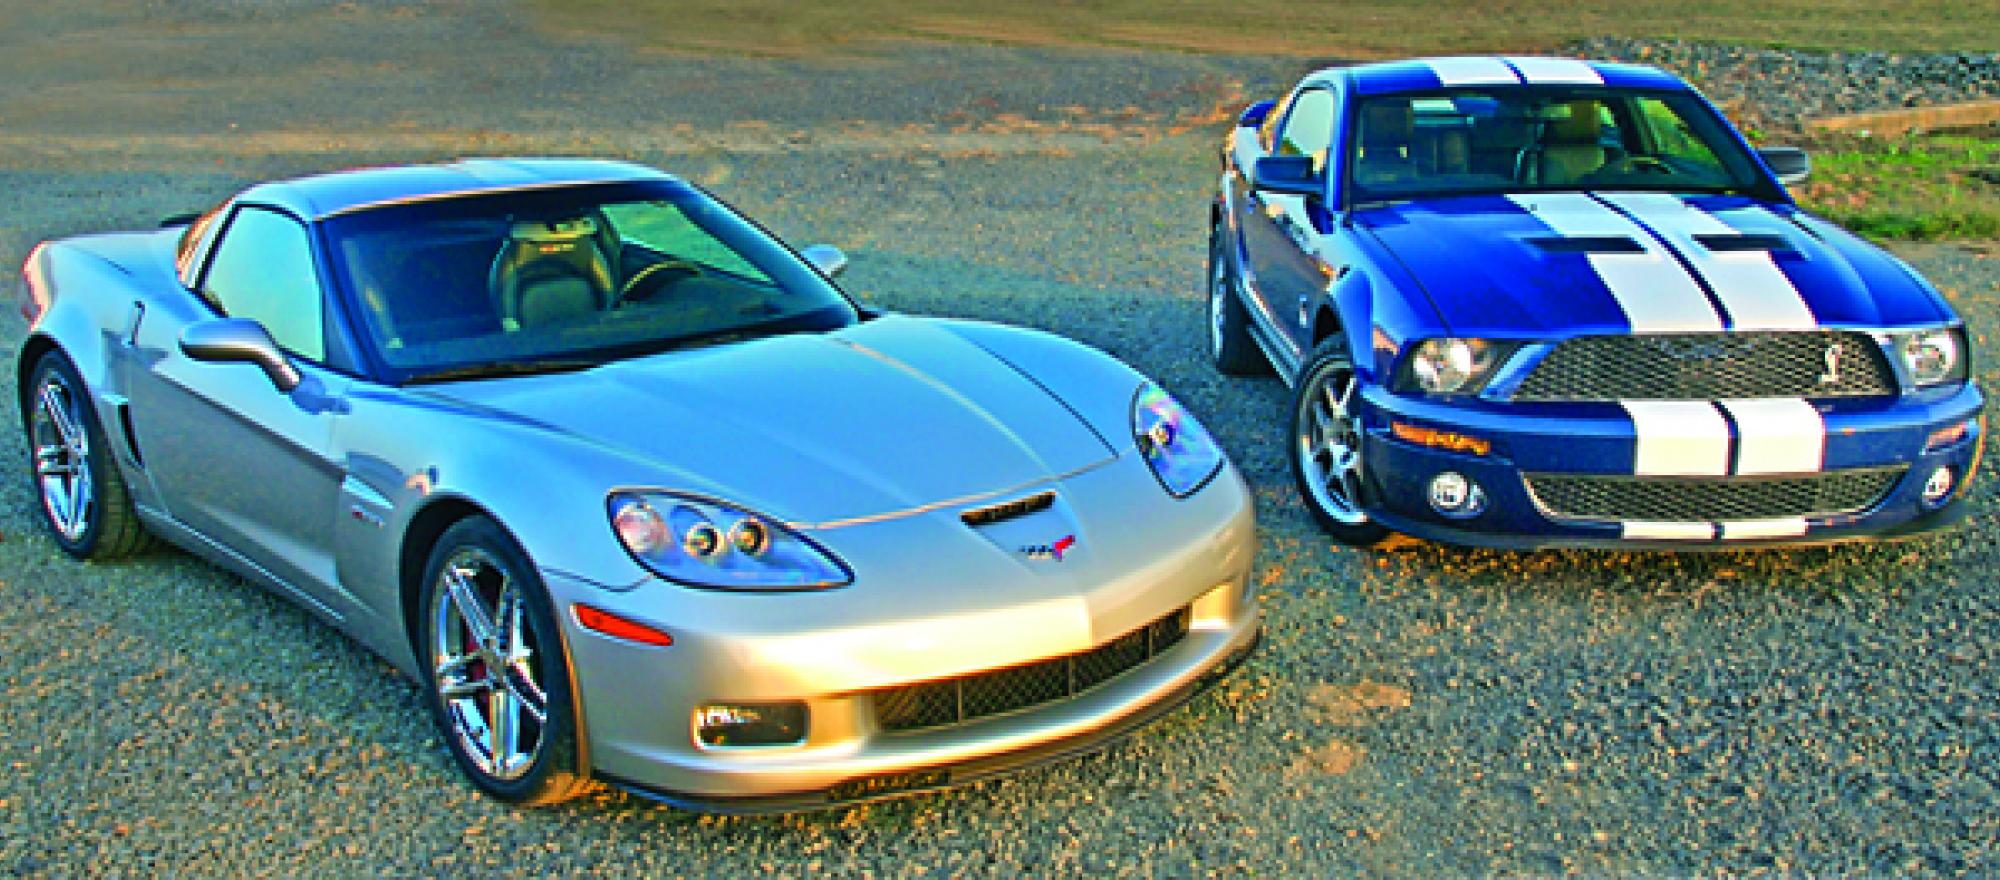 The Chevrolet Corvette Z06 and the Ford Shelby GT500 Cobra